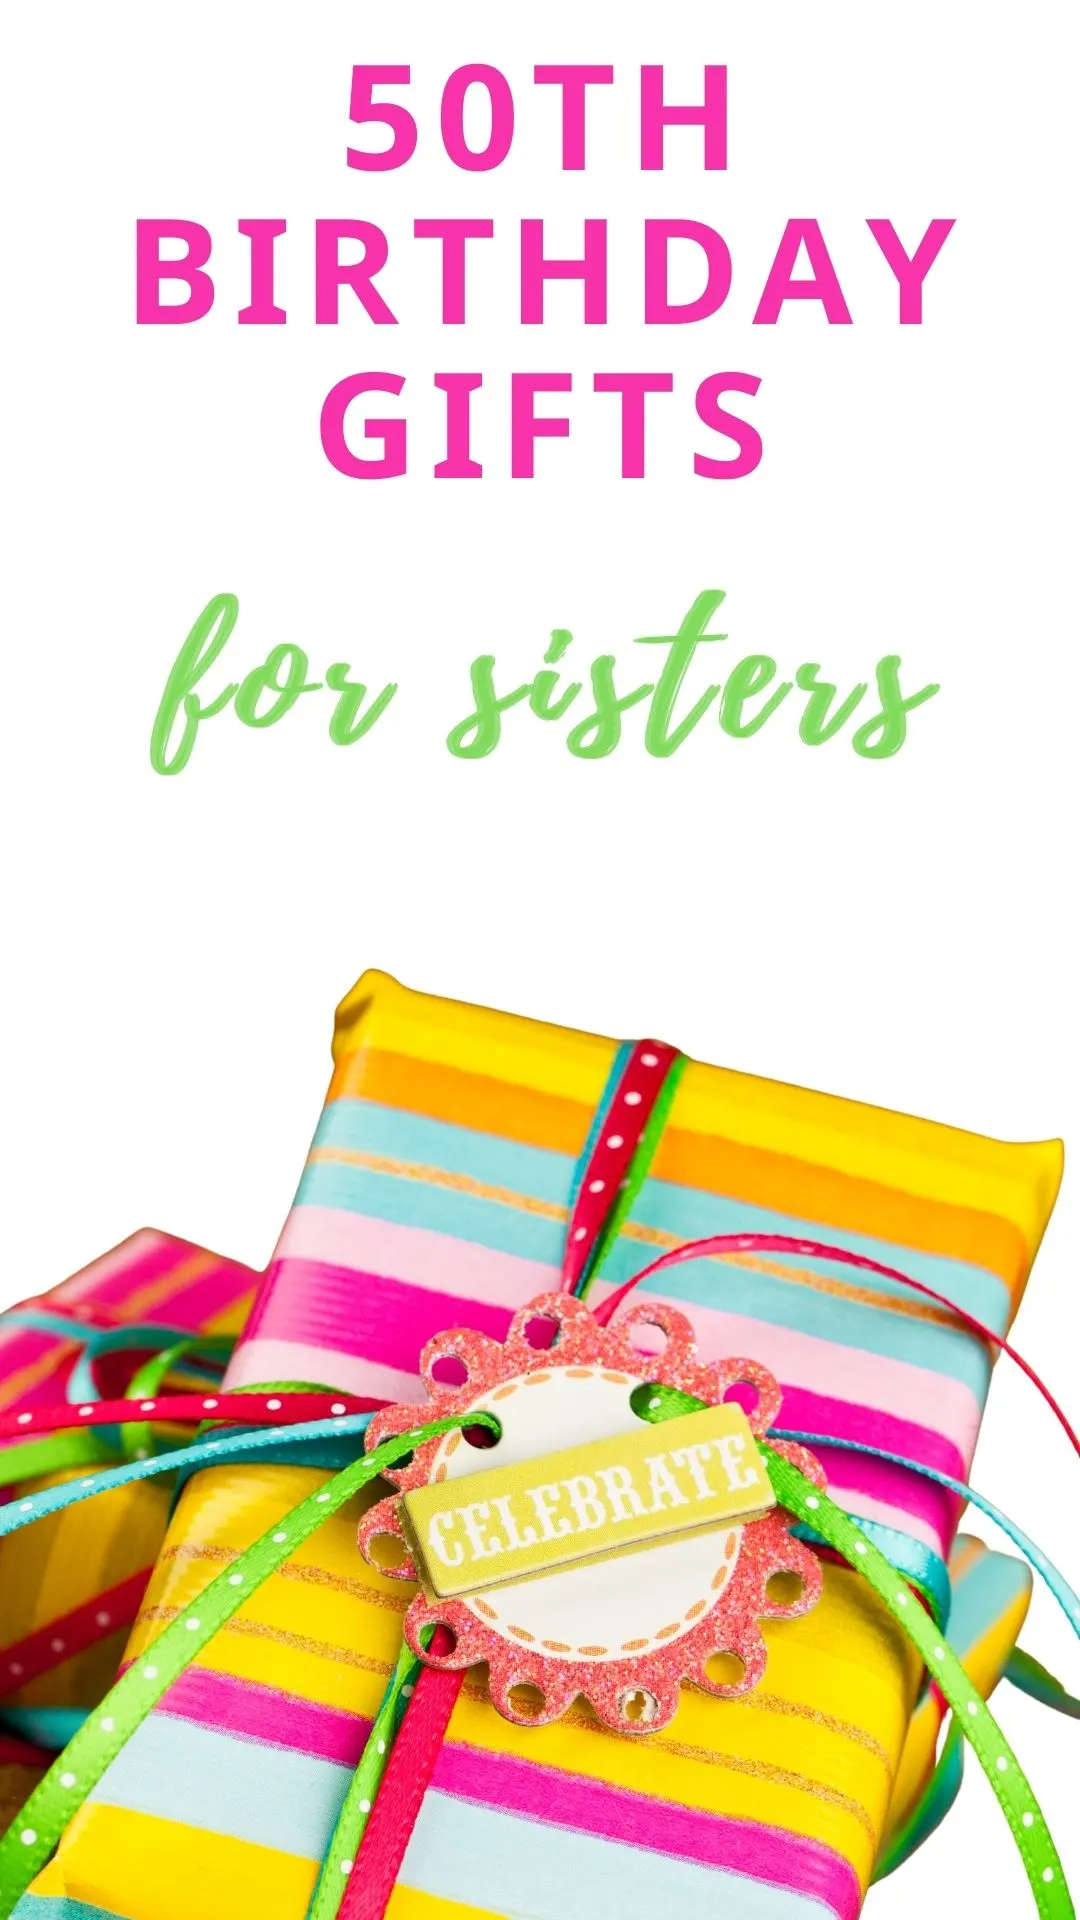 50th birthday gifts for sisters